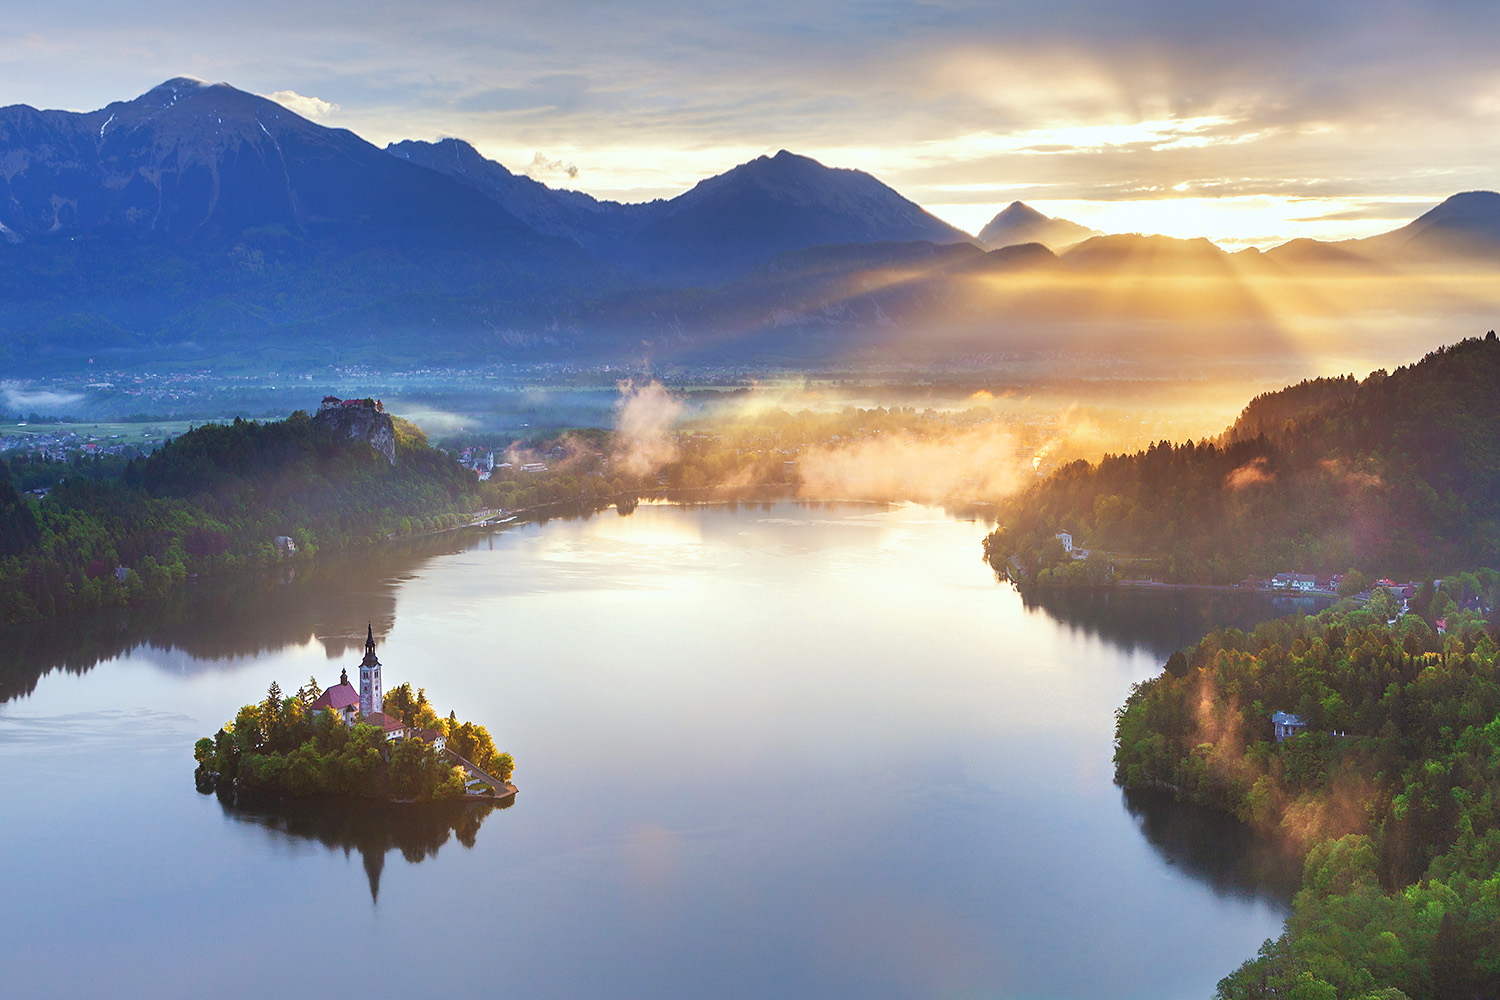 Lake Bled at dawn as seen from the Osojnica viewpoint with the Bled Castle, the Bled island and Tito's villa